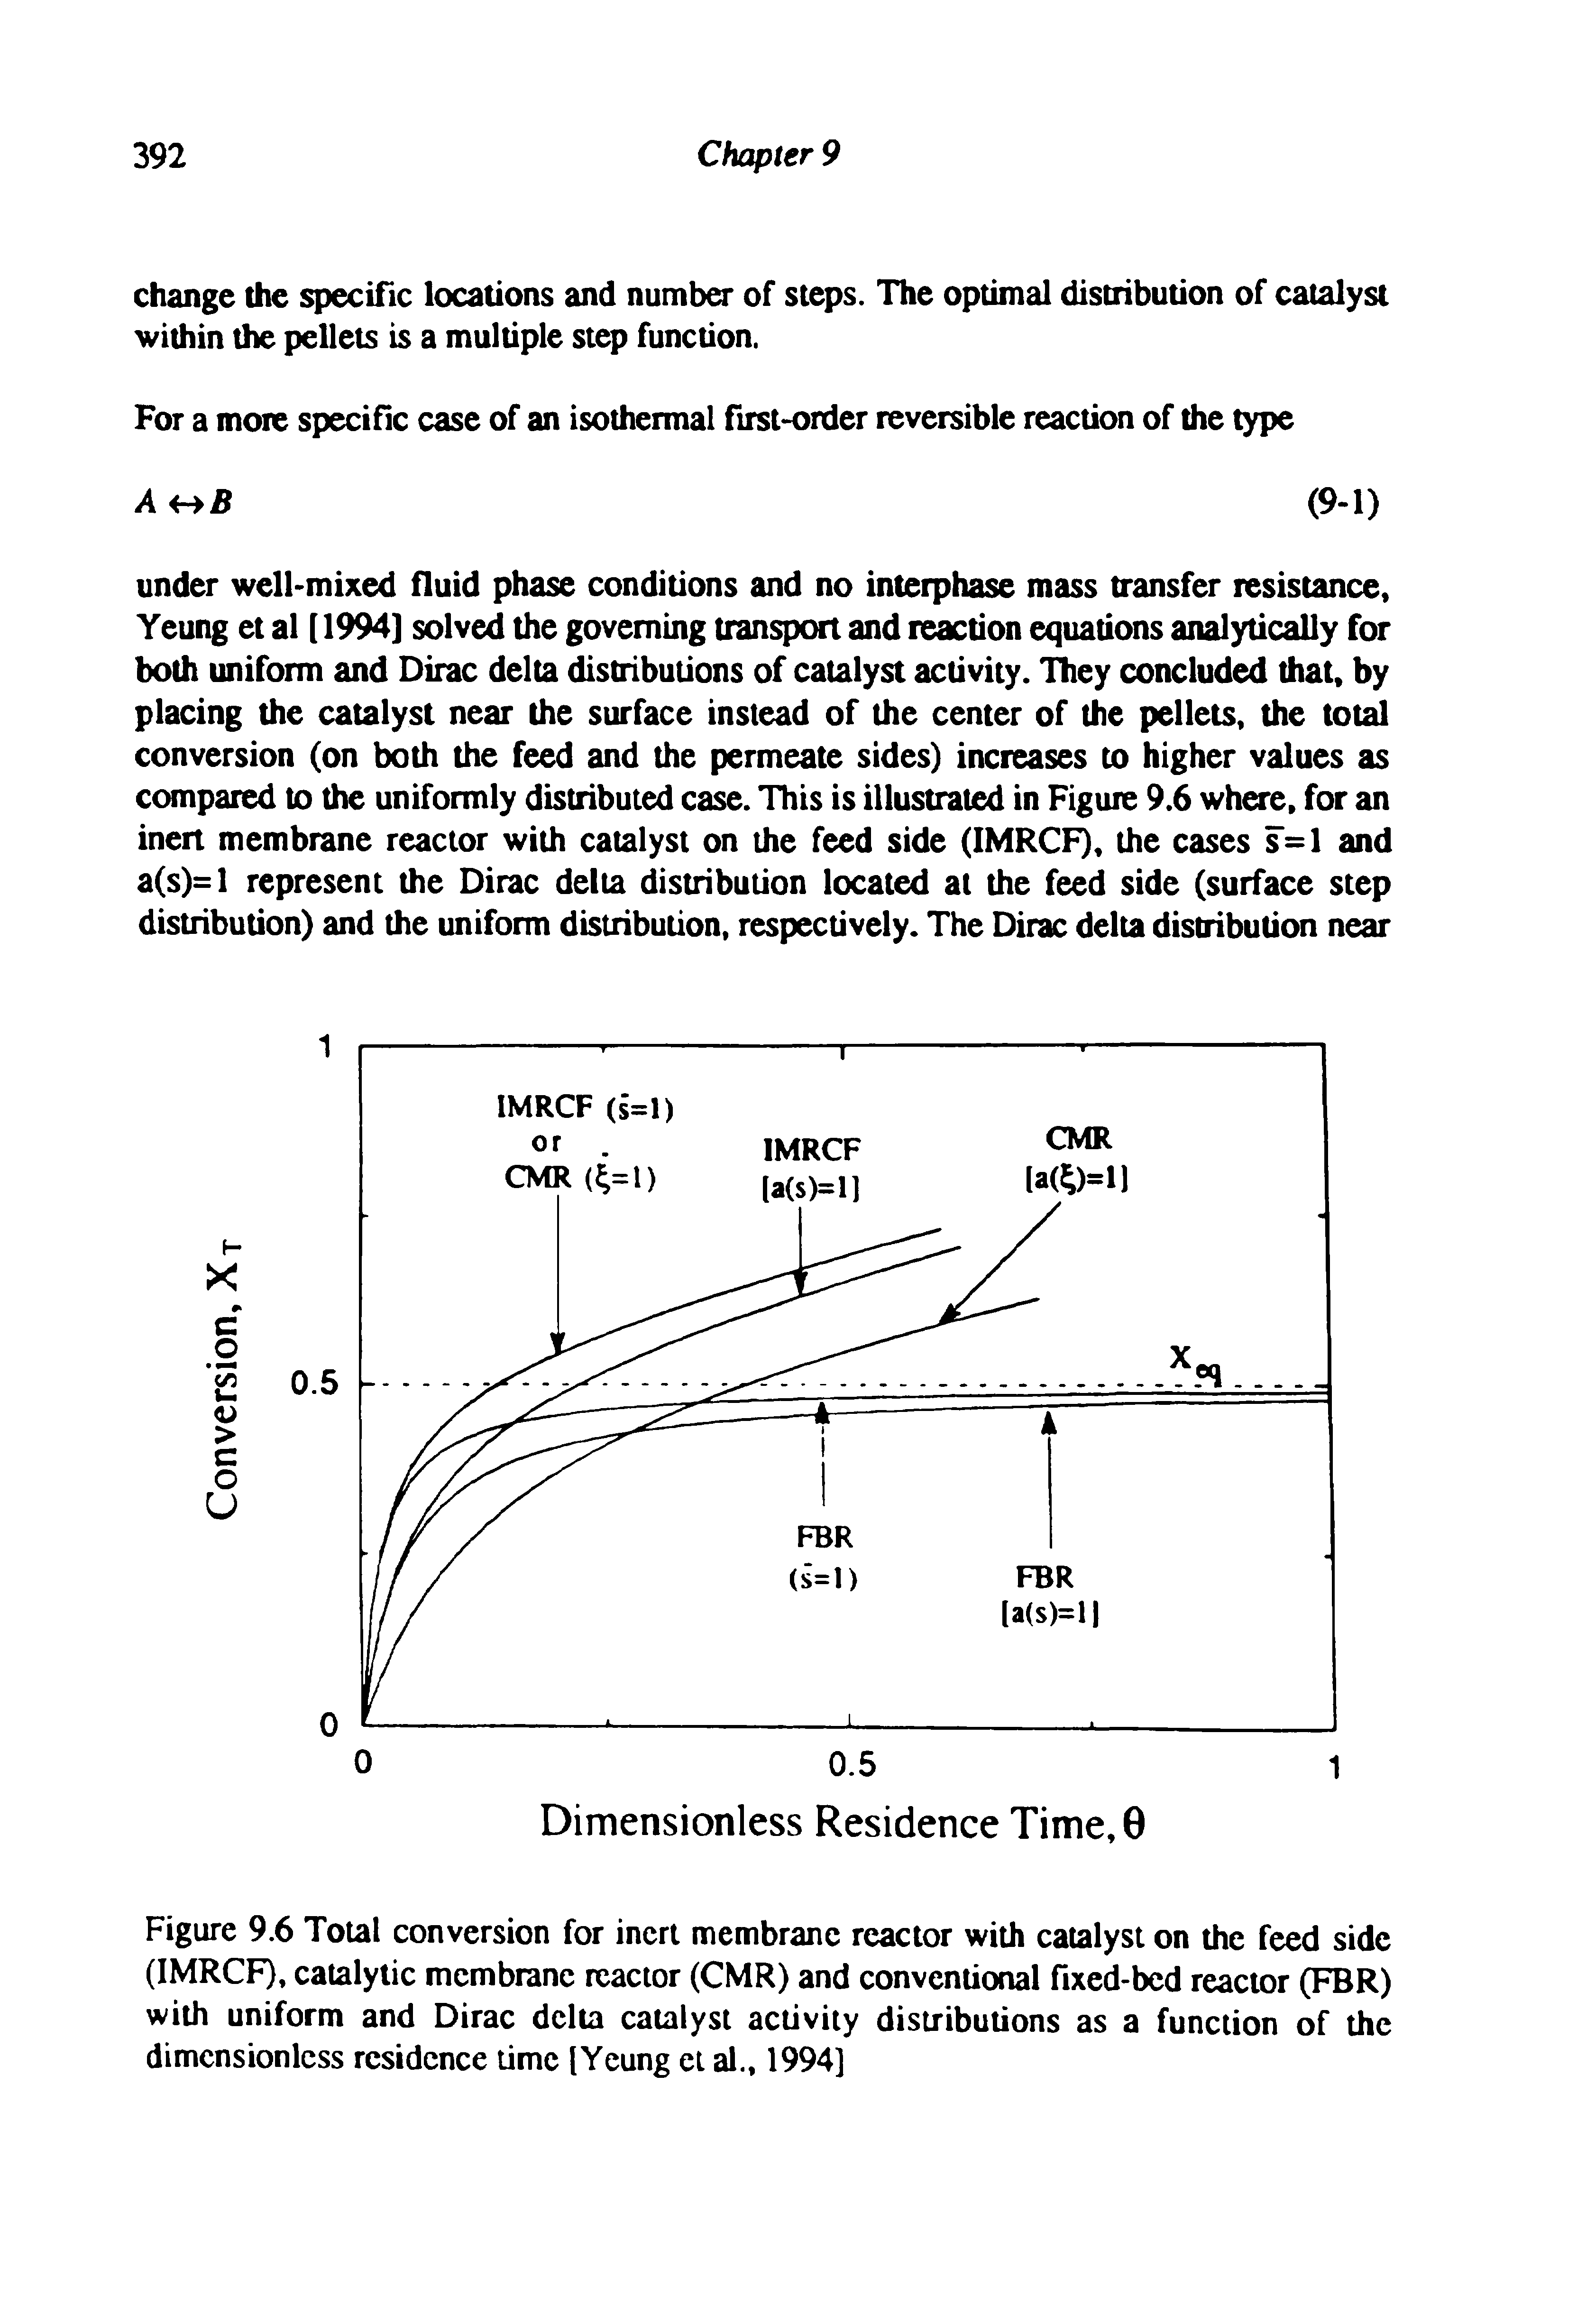 Figure 9.6 Total conversion for inert membrane reactor with catalyst on the feed side (IMRCF), catalytic membrane reactor (CMR) and conventional fixed-bed reactor (FBR) with uniform and Dirac delta catalyst activity distributions as a function of the dimensionless residence time [Yeung et al., 1994]...